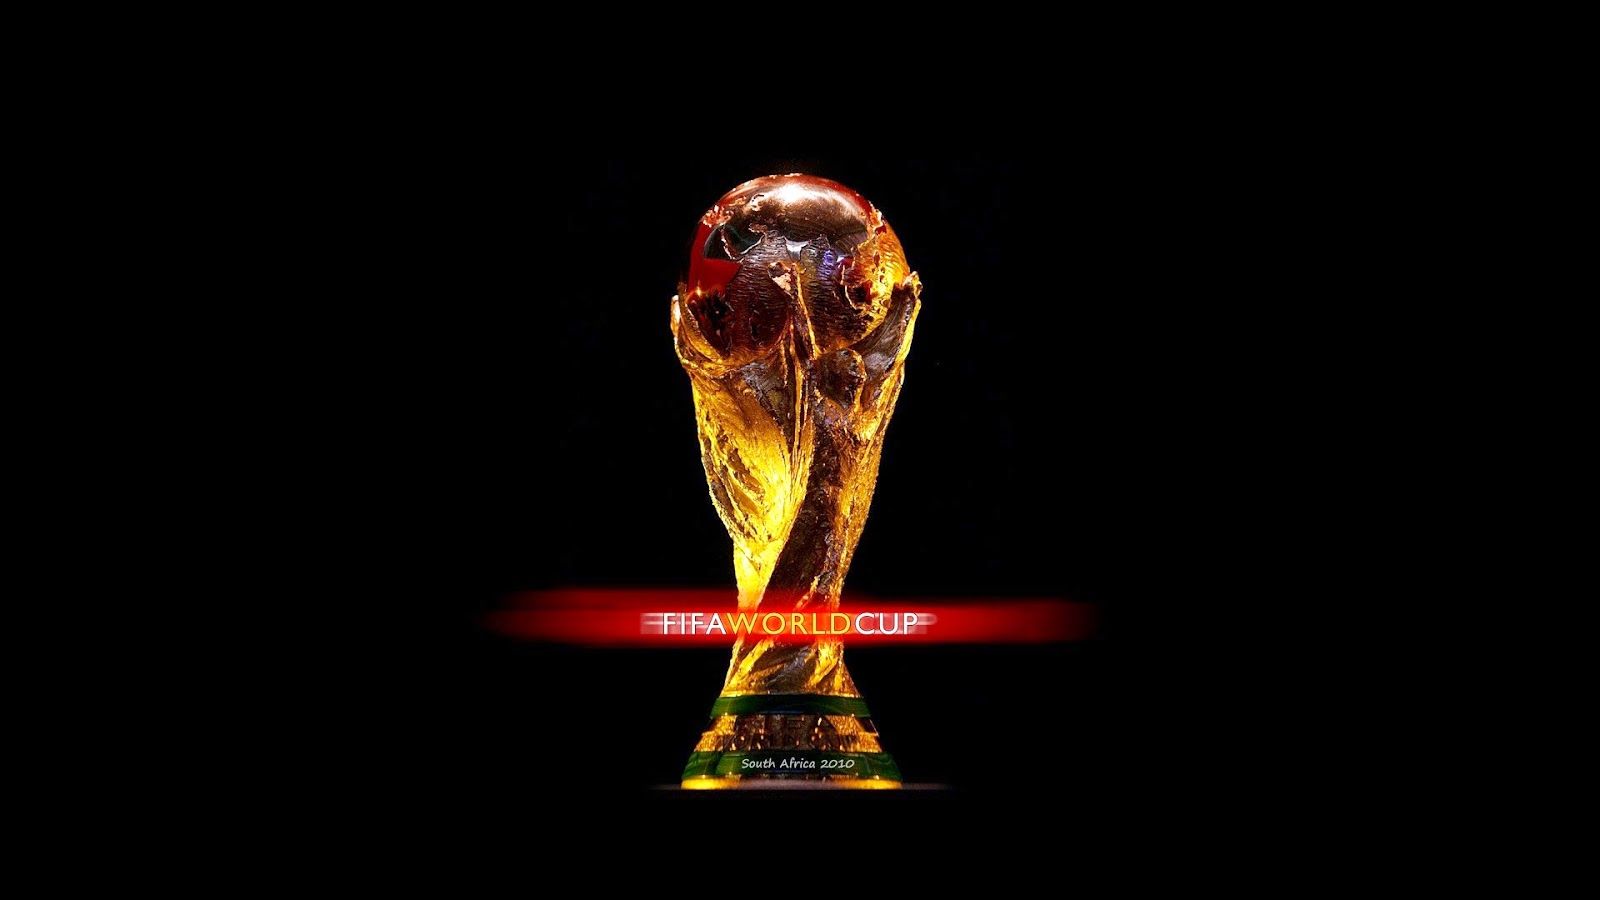 World Cup Trophy Wallpaper. Lonely Cup Background, Teacup Pig Wallpaper and America's Cup Wallpaper